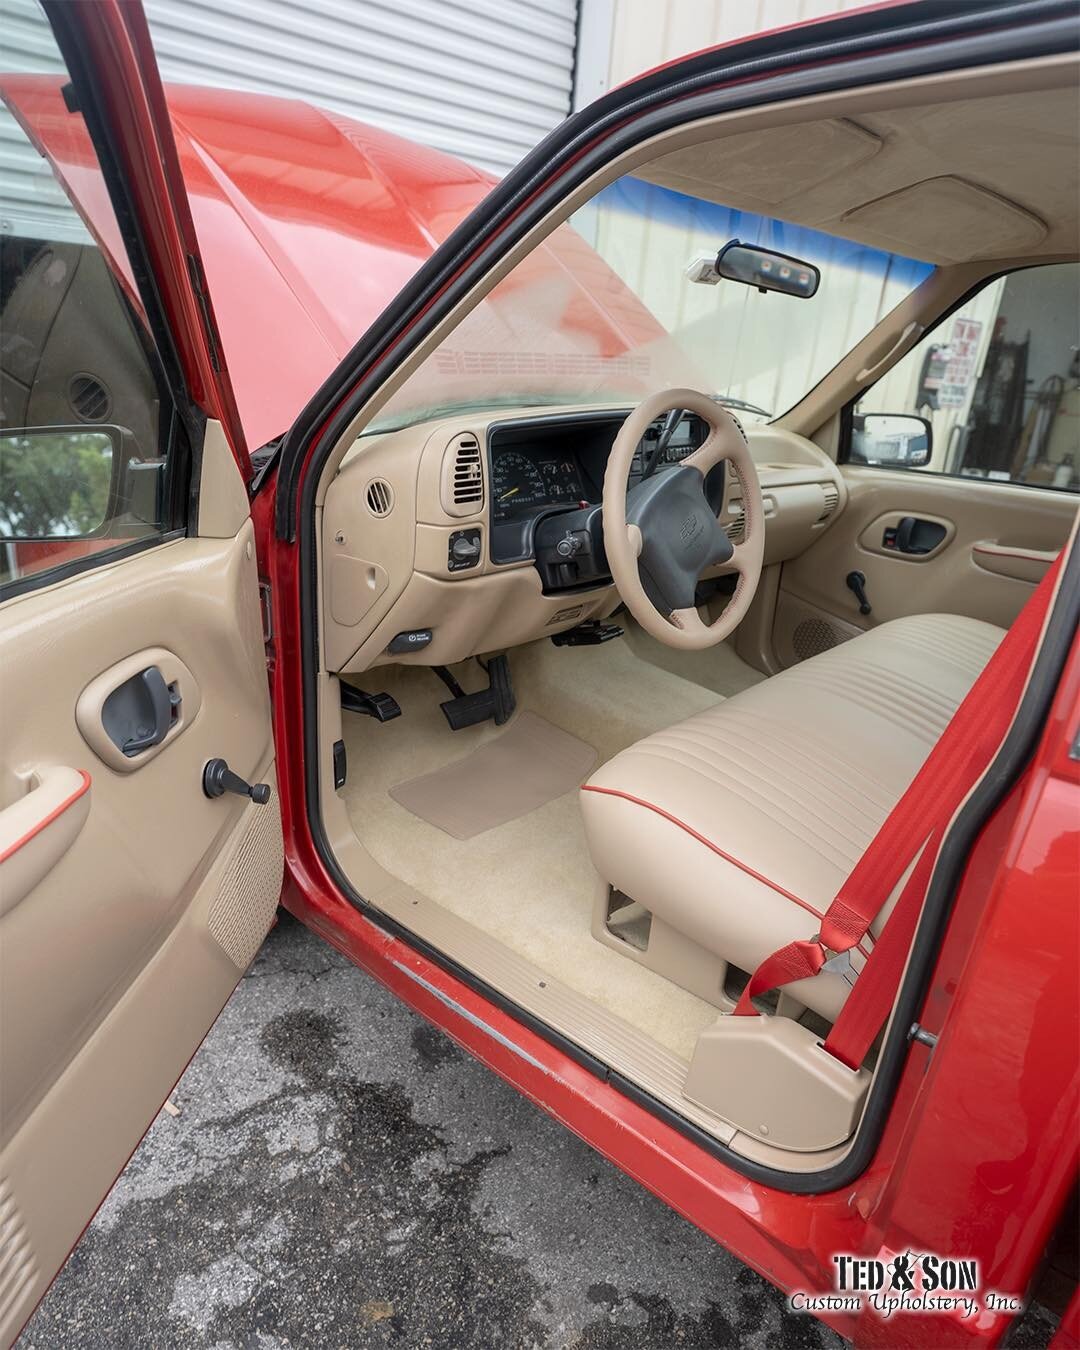 Check out the full interior transformation in this beautiful 1995 Chevy 3500. 
She got a leather steering wheel, a premium vinyl bench seat, suede headliner and visors, new fire red seat belts, new carpet with all plastics painted to match. 

At Ted 